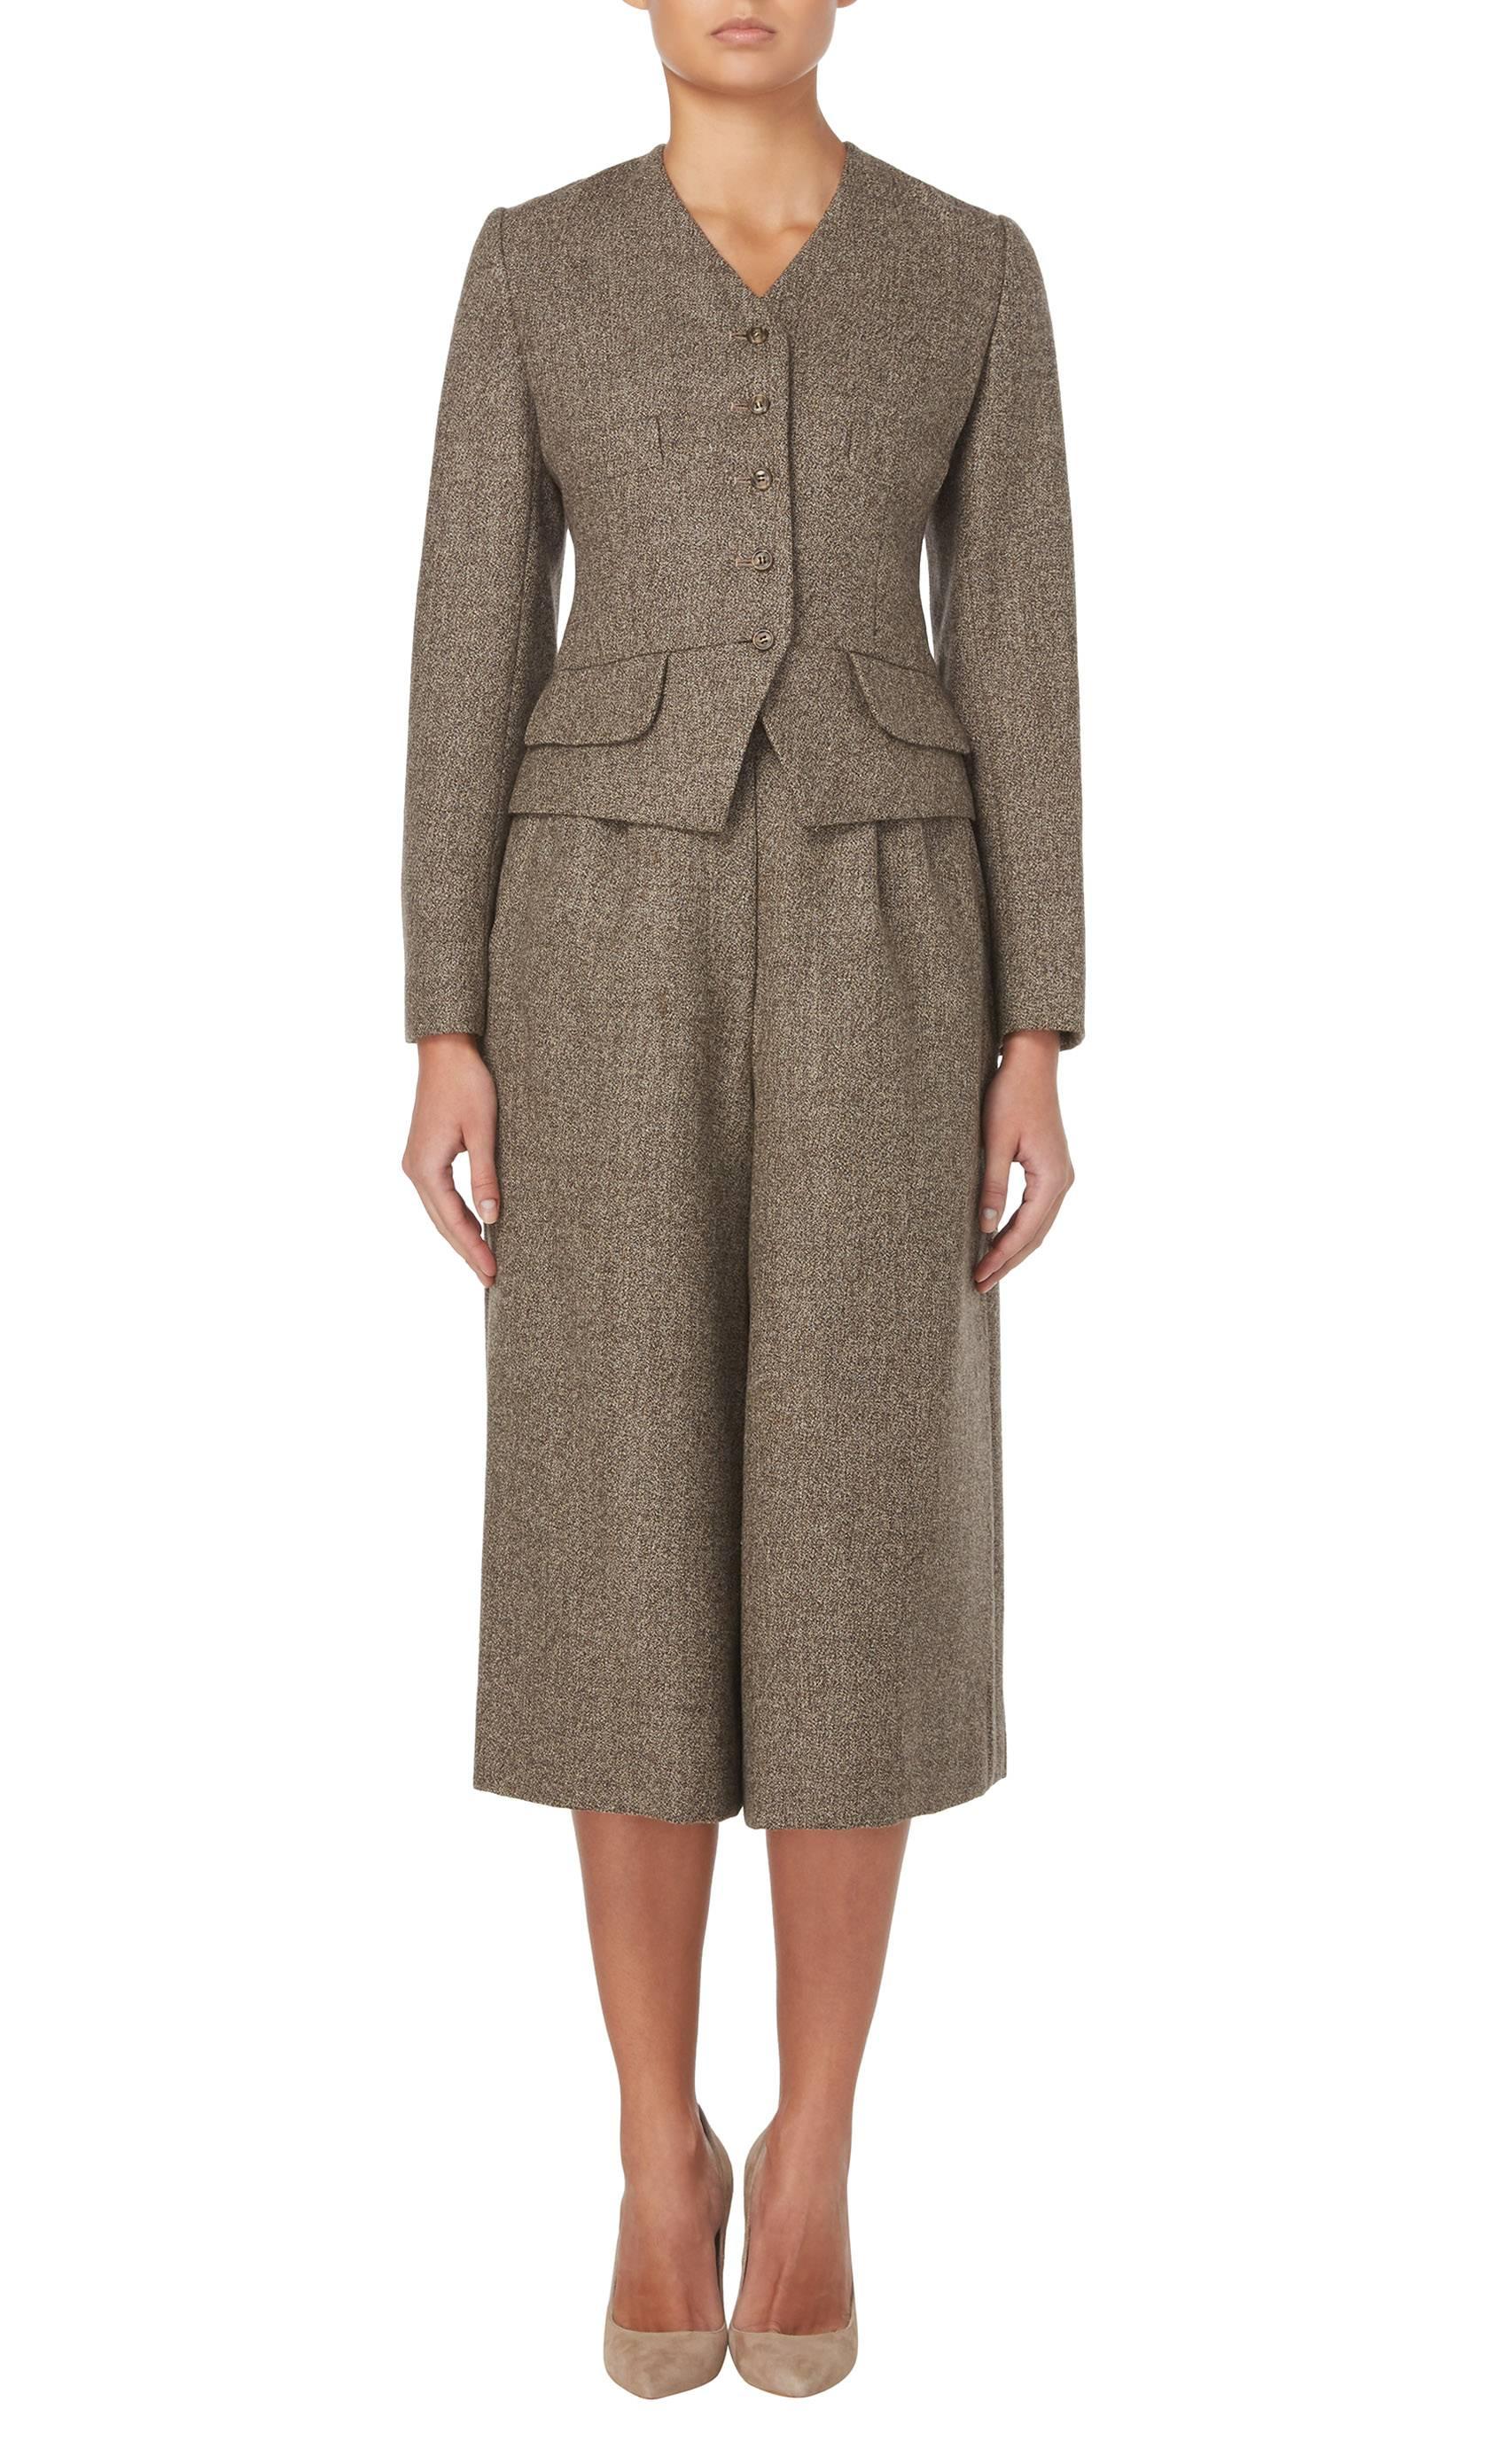 This three-piece ensemble is a superb example of Bill Blass tailoring, composed of mid-length culottes, fitted sleeveless top and a box cut jacket in brown wool. The 1970s had a revival of 1920s style thanks to the first film version of 'The Great